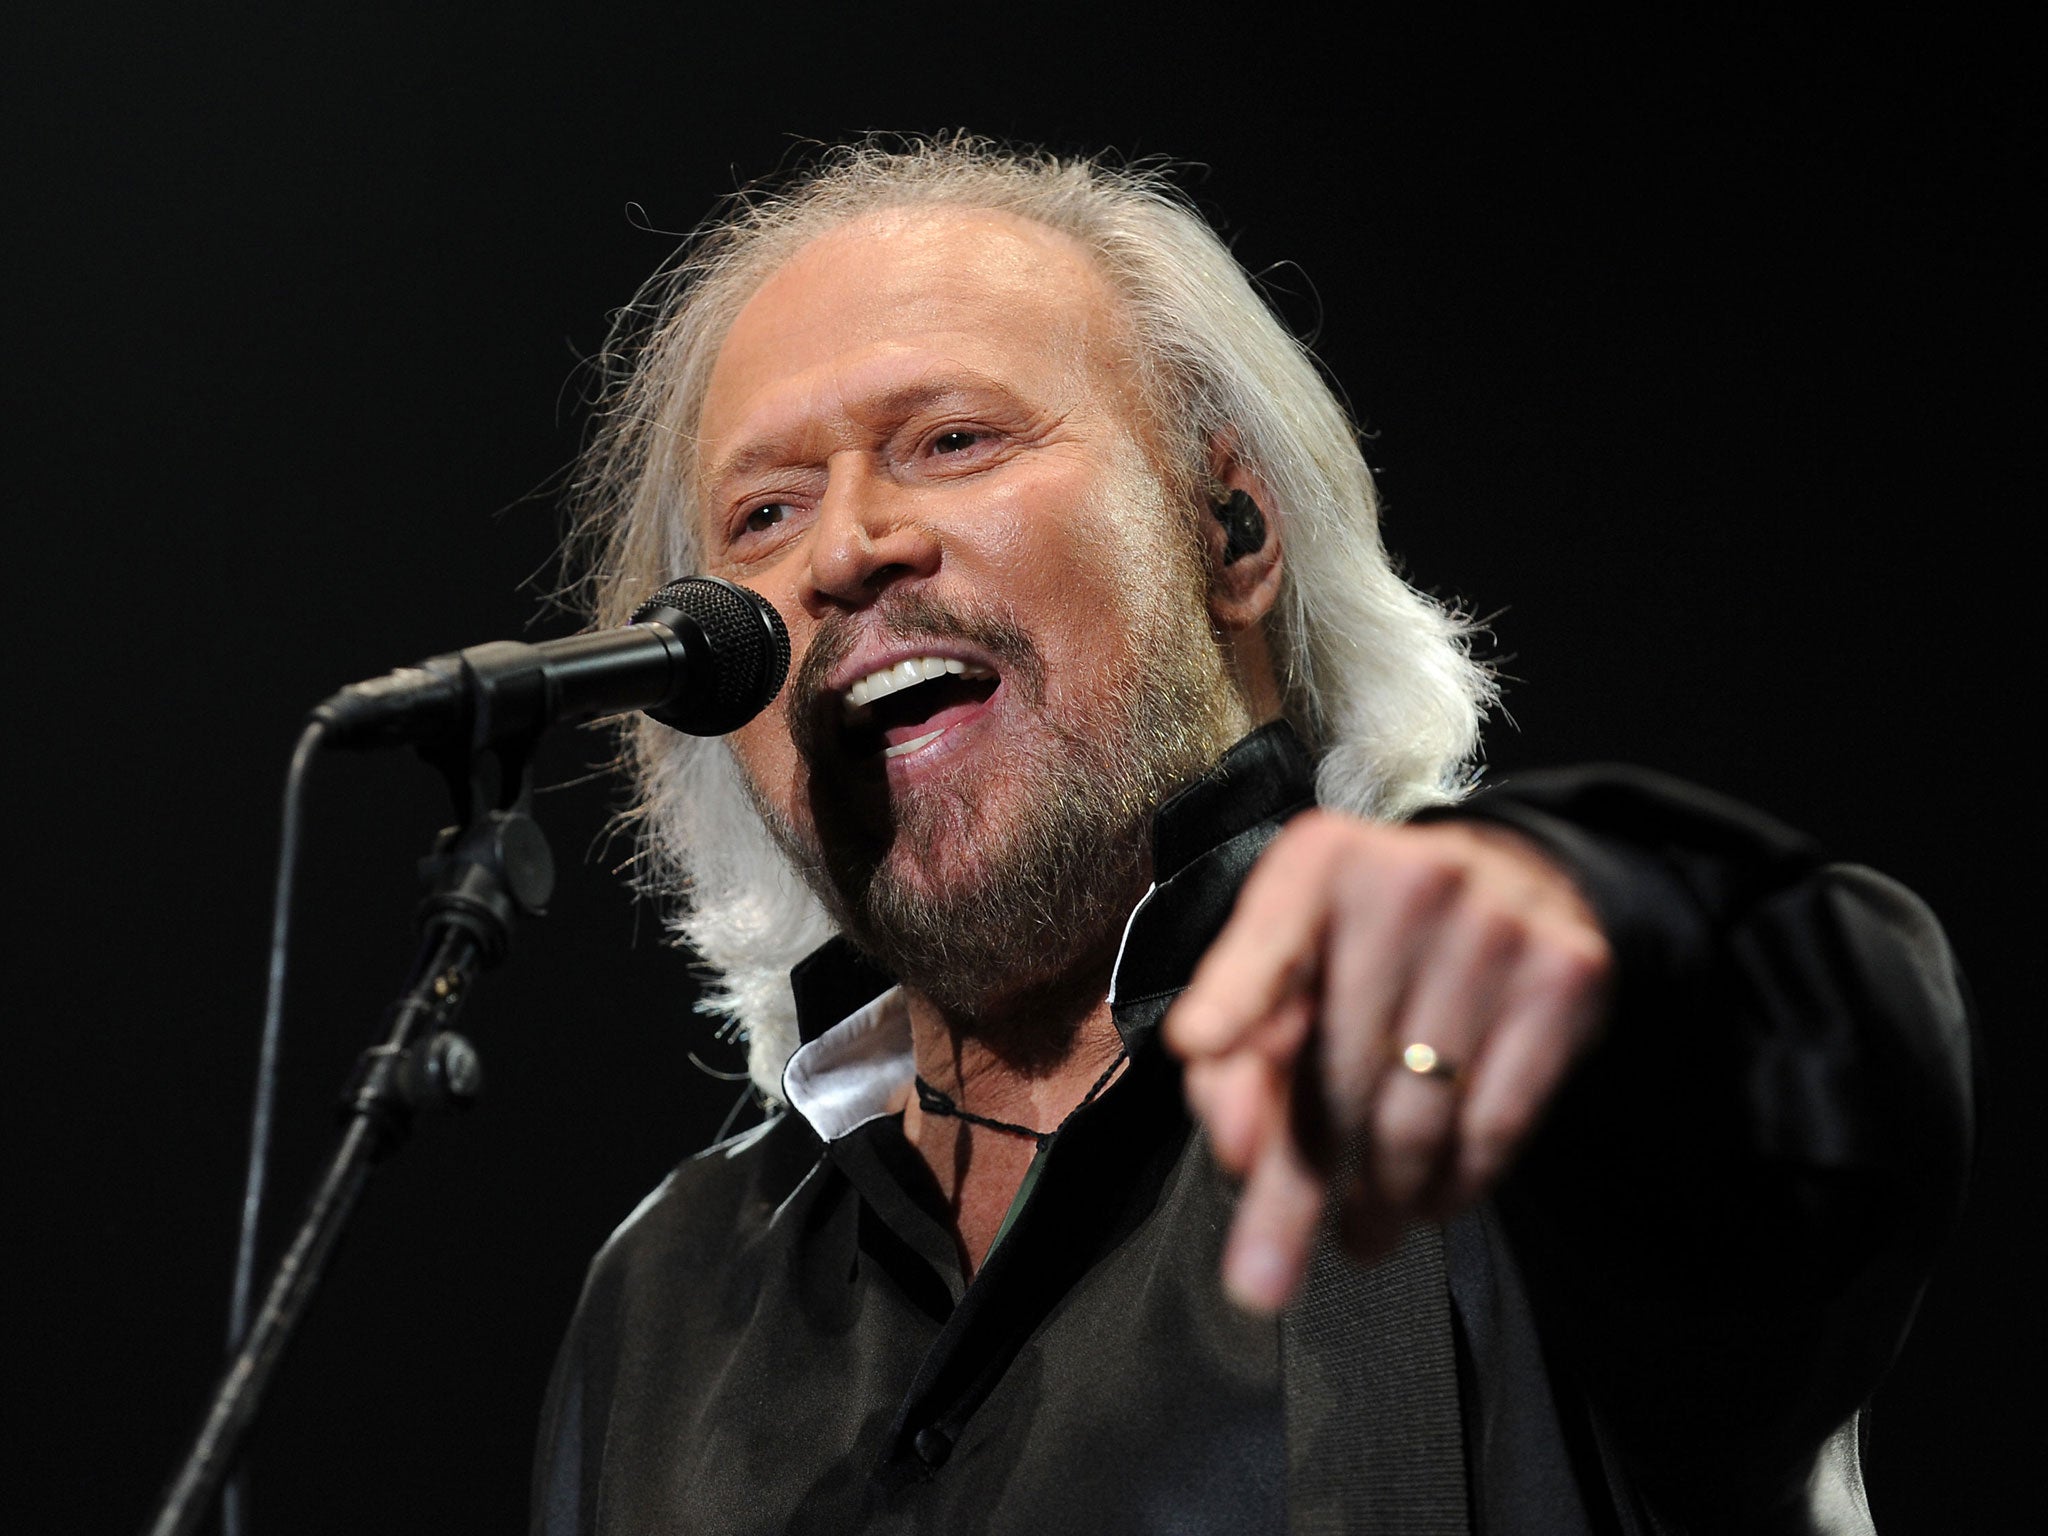 Barry Gibb hopes to die on stage while singing ‘Stayin Alive’ | The